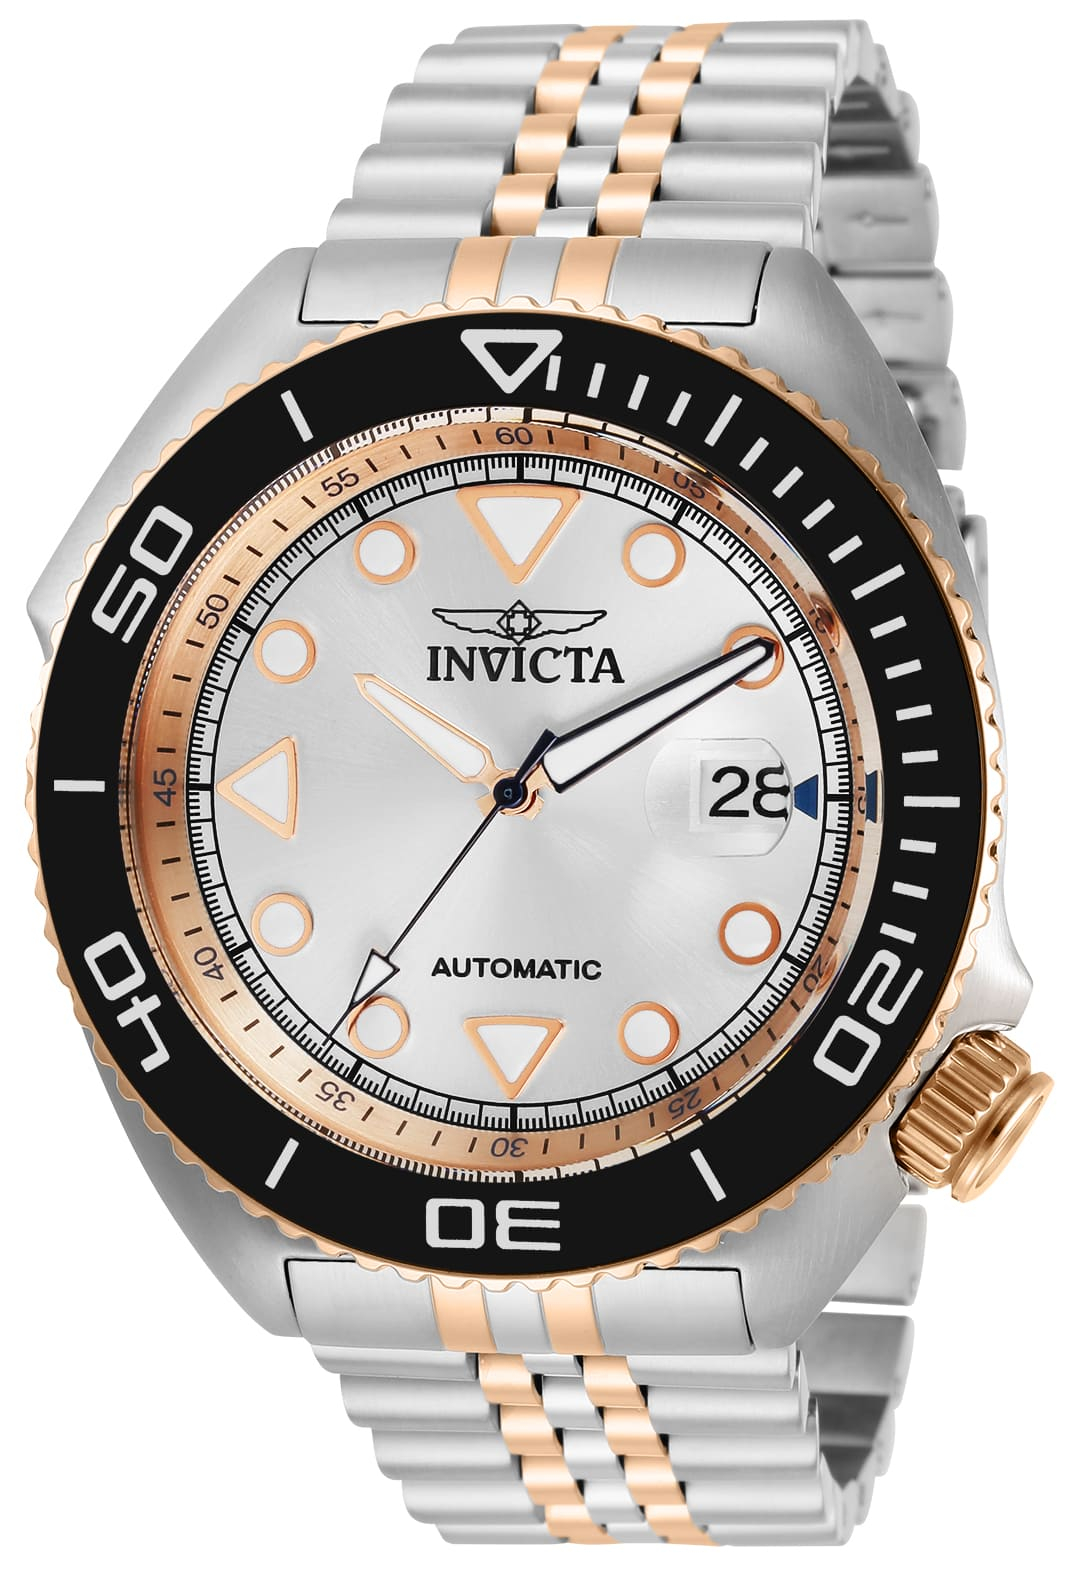 Invicta Pro Diver Automatic Men's Watch - 47mm, Steel, Rose Gold (ZG-30419)